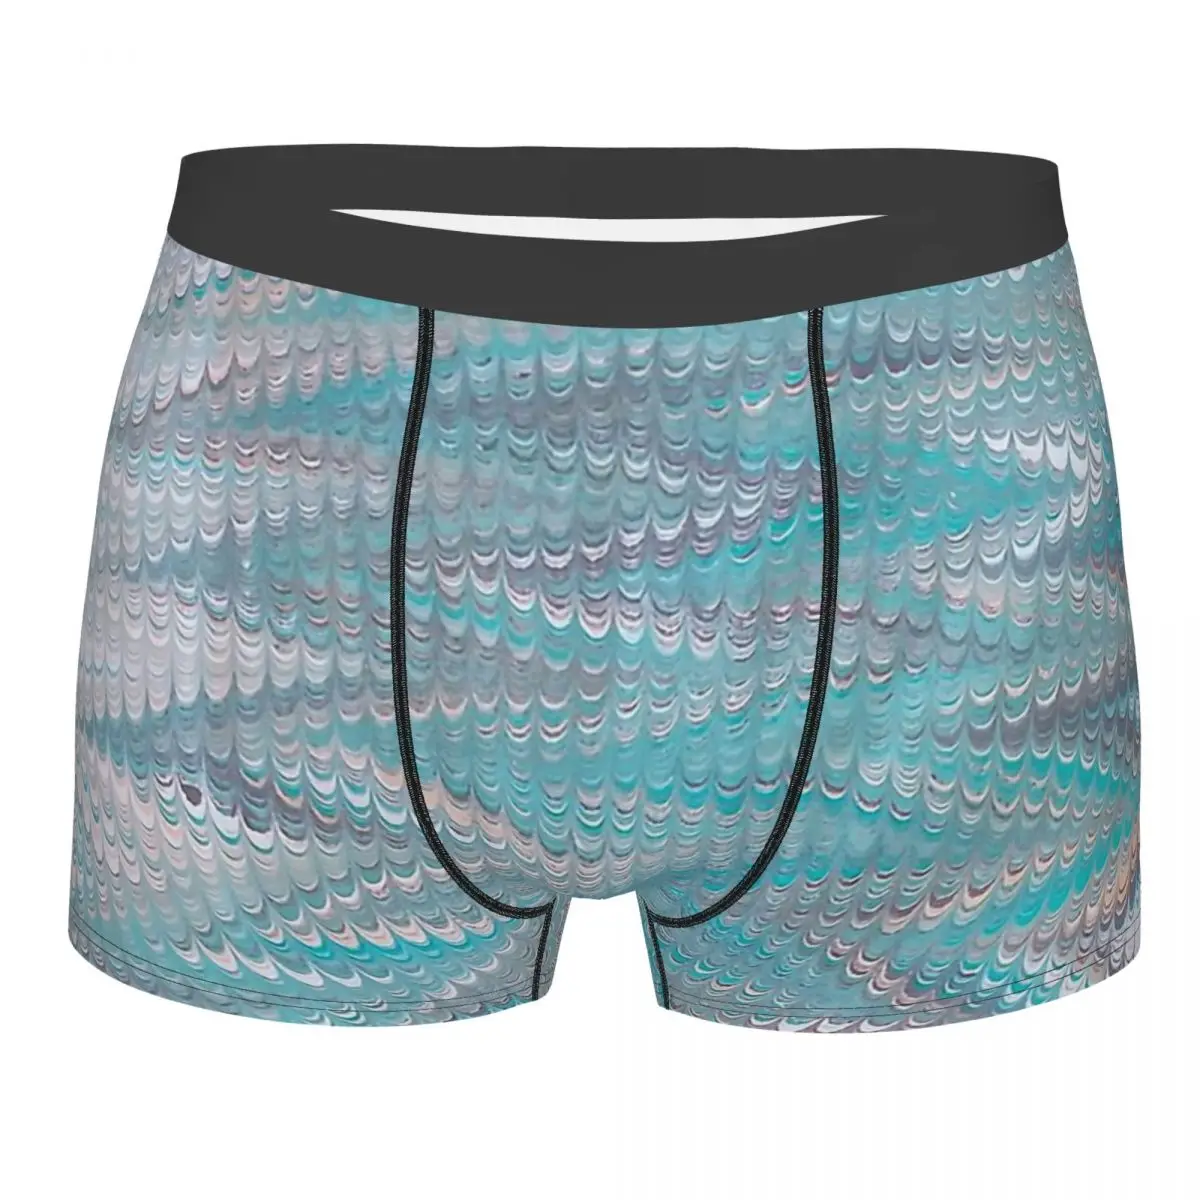 Blue Waves An Hint Of Gold Sparkles Scallopped Marbling Marbled Marble Underpants Panties Male Underwear Shorts Boxer Briefs